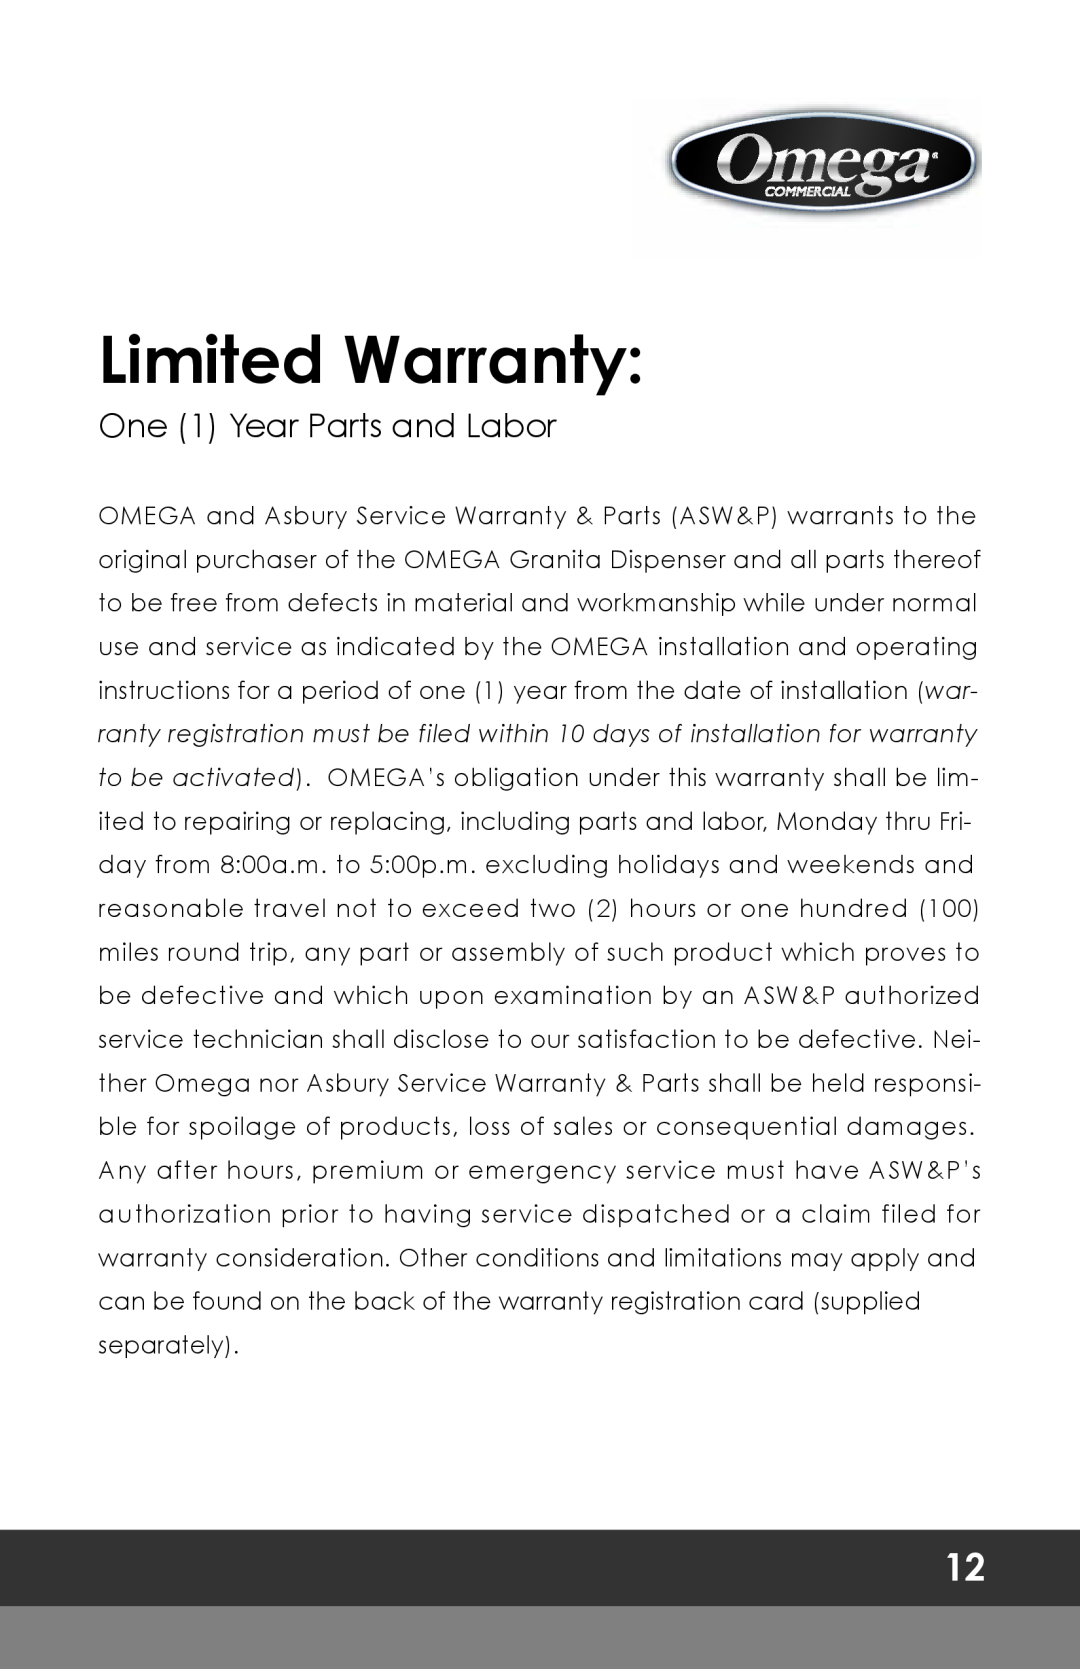 Omega OFS20, OFS30 instruction manual Limited Warranty, One 1 Year Parts and Labor 